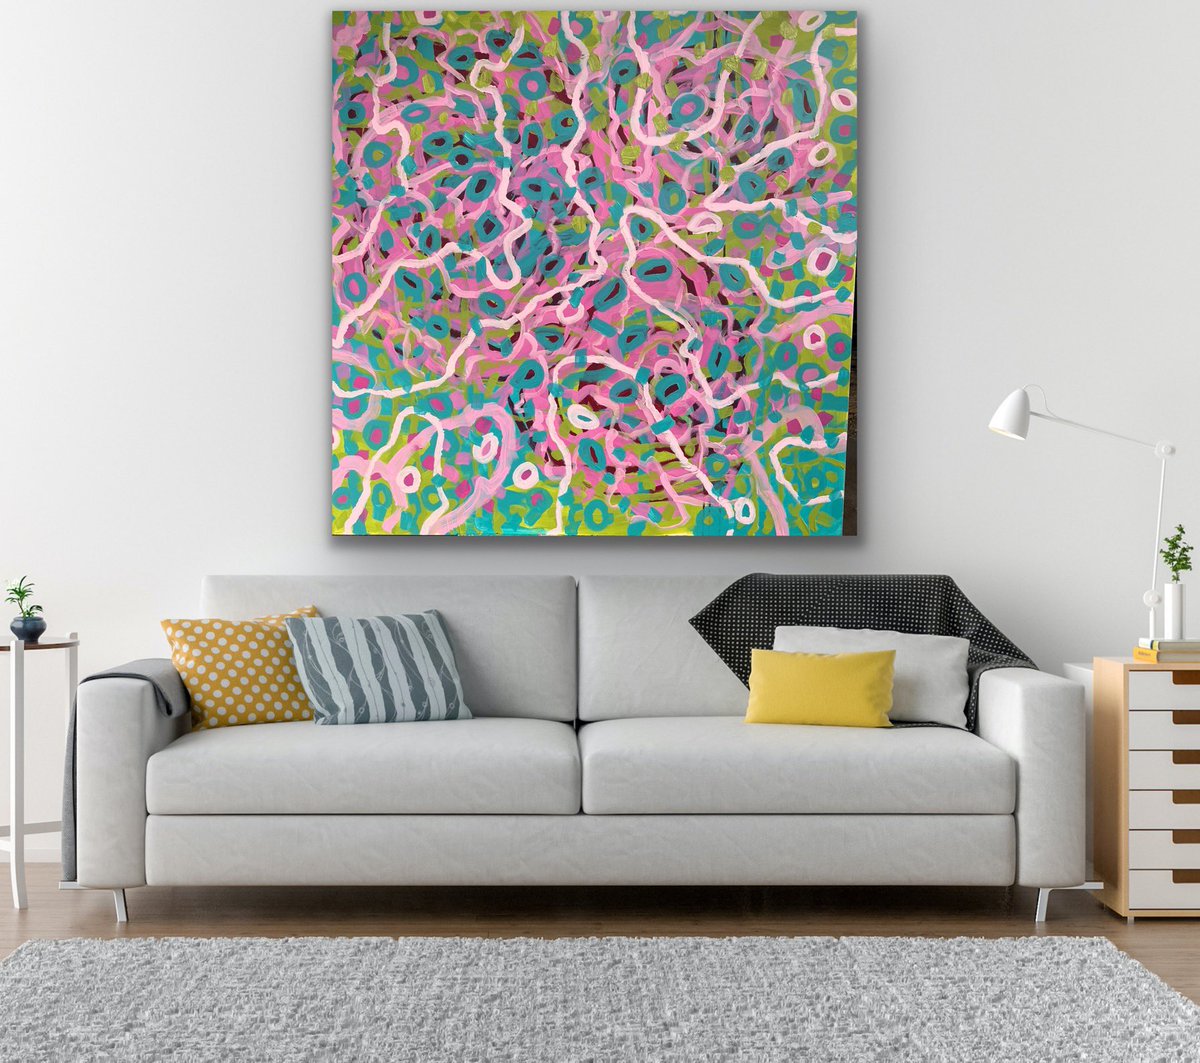 Looking for a lounge area feature original
Work of art. Number 15 of my spring collection. ‘Pierre de Ronsard’ is Available for purchase here👉 carolinereidartist.com/collections/19… 
It is large 120cm square. #gardenabstract #abstractartist